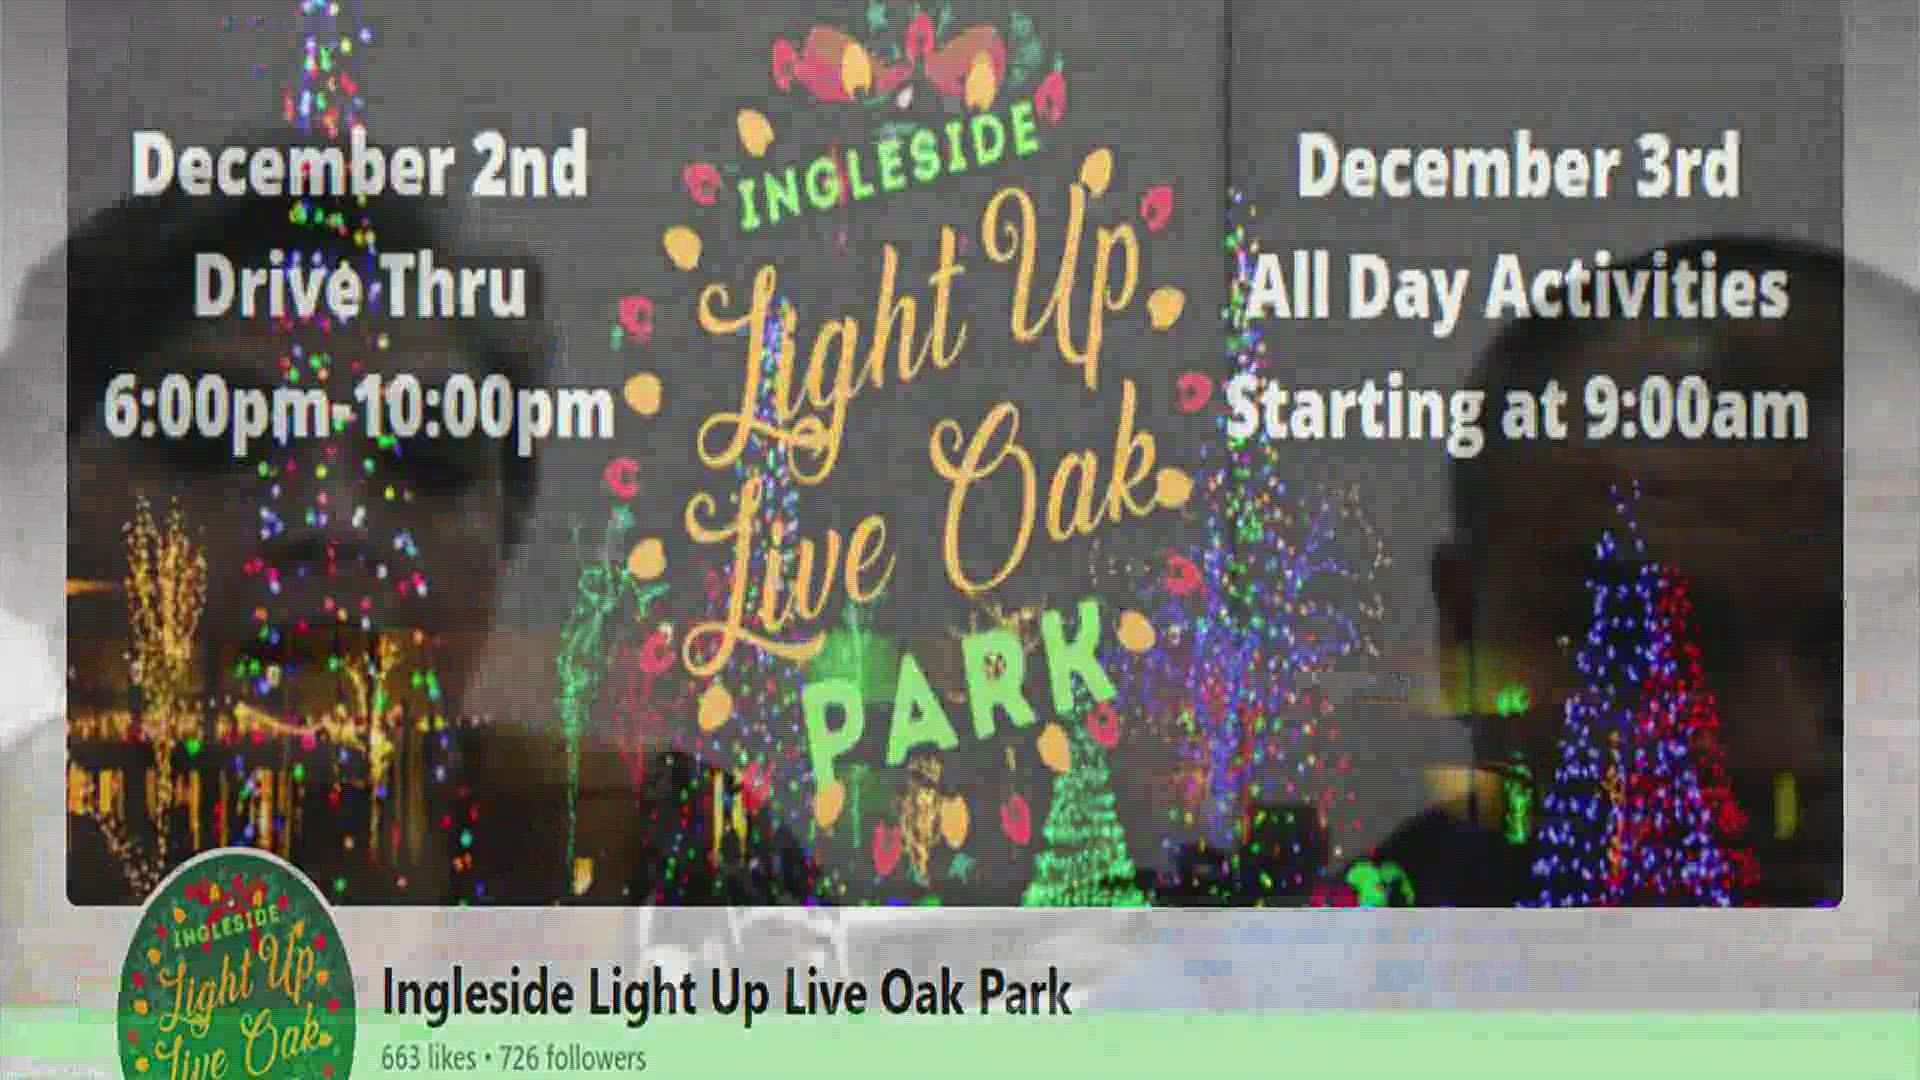 Ingleside Chamber of Commerce members Barbara Greg and Martin De los Santos joined us live to share how Ingleside kicks off the holidays with Light Up Live Oak Park.